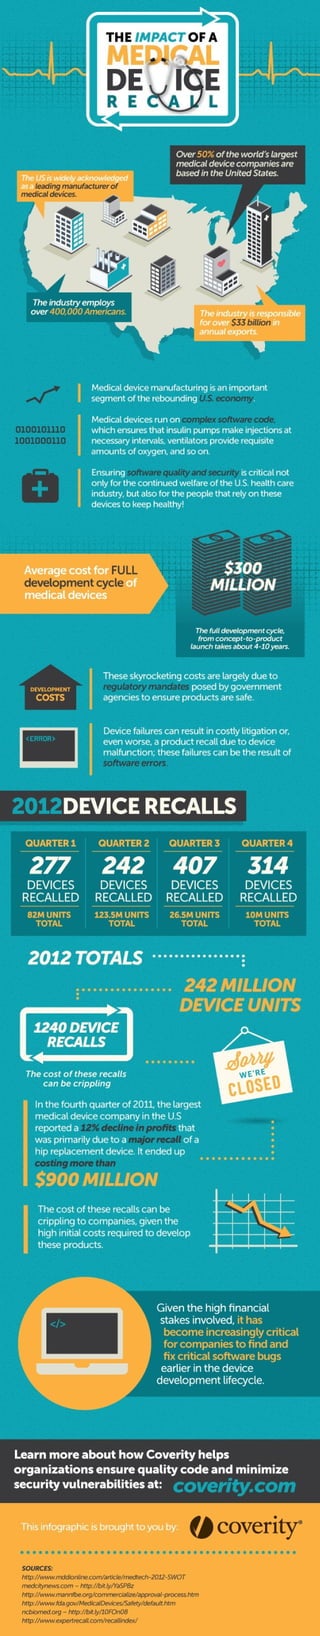 The Impact of a Medical Device Recall